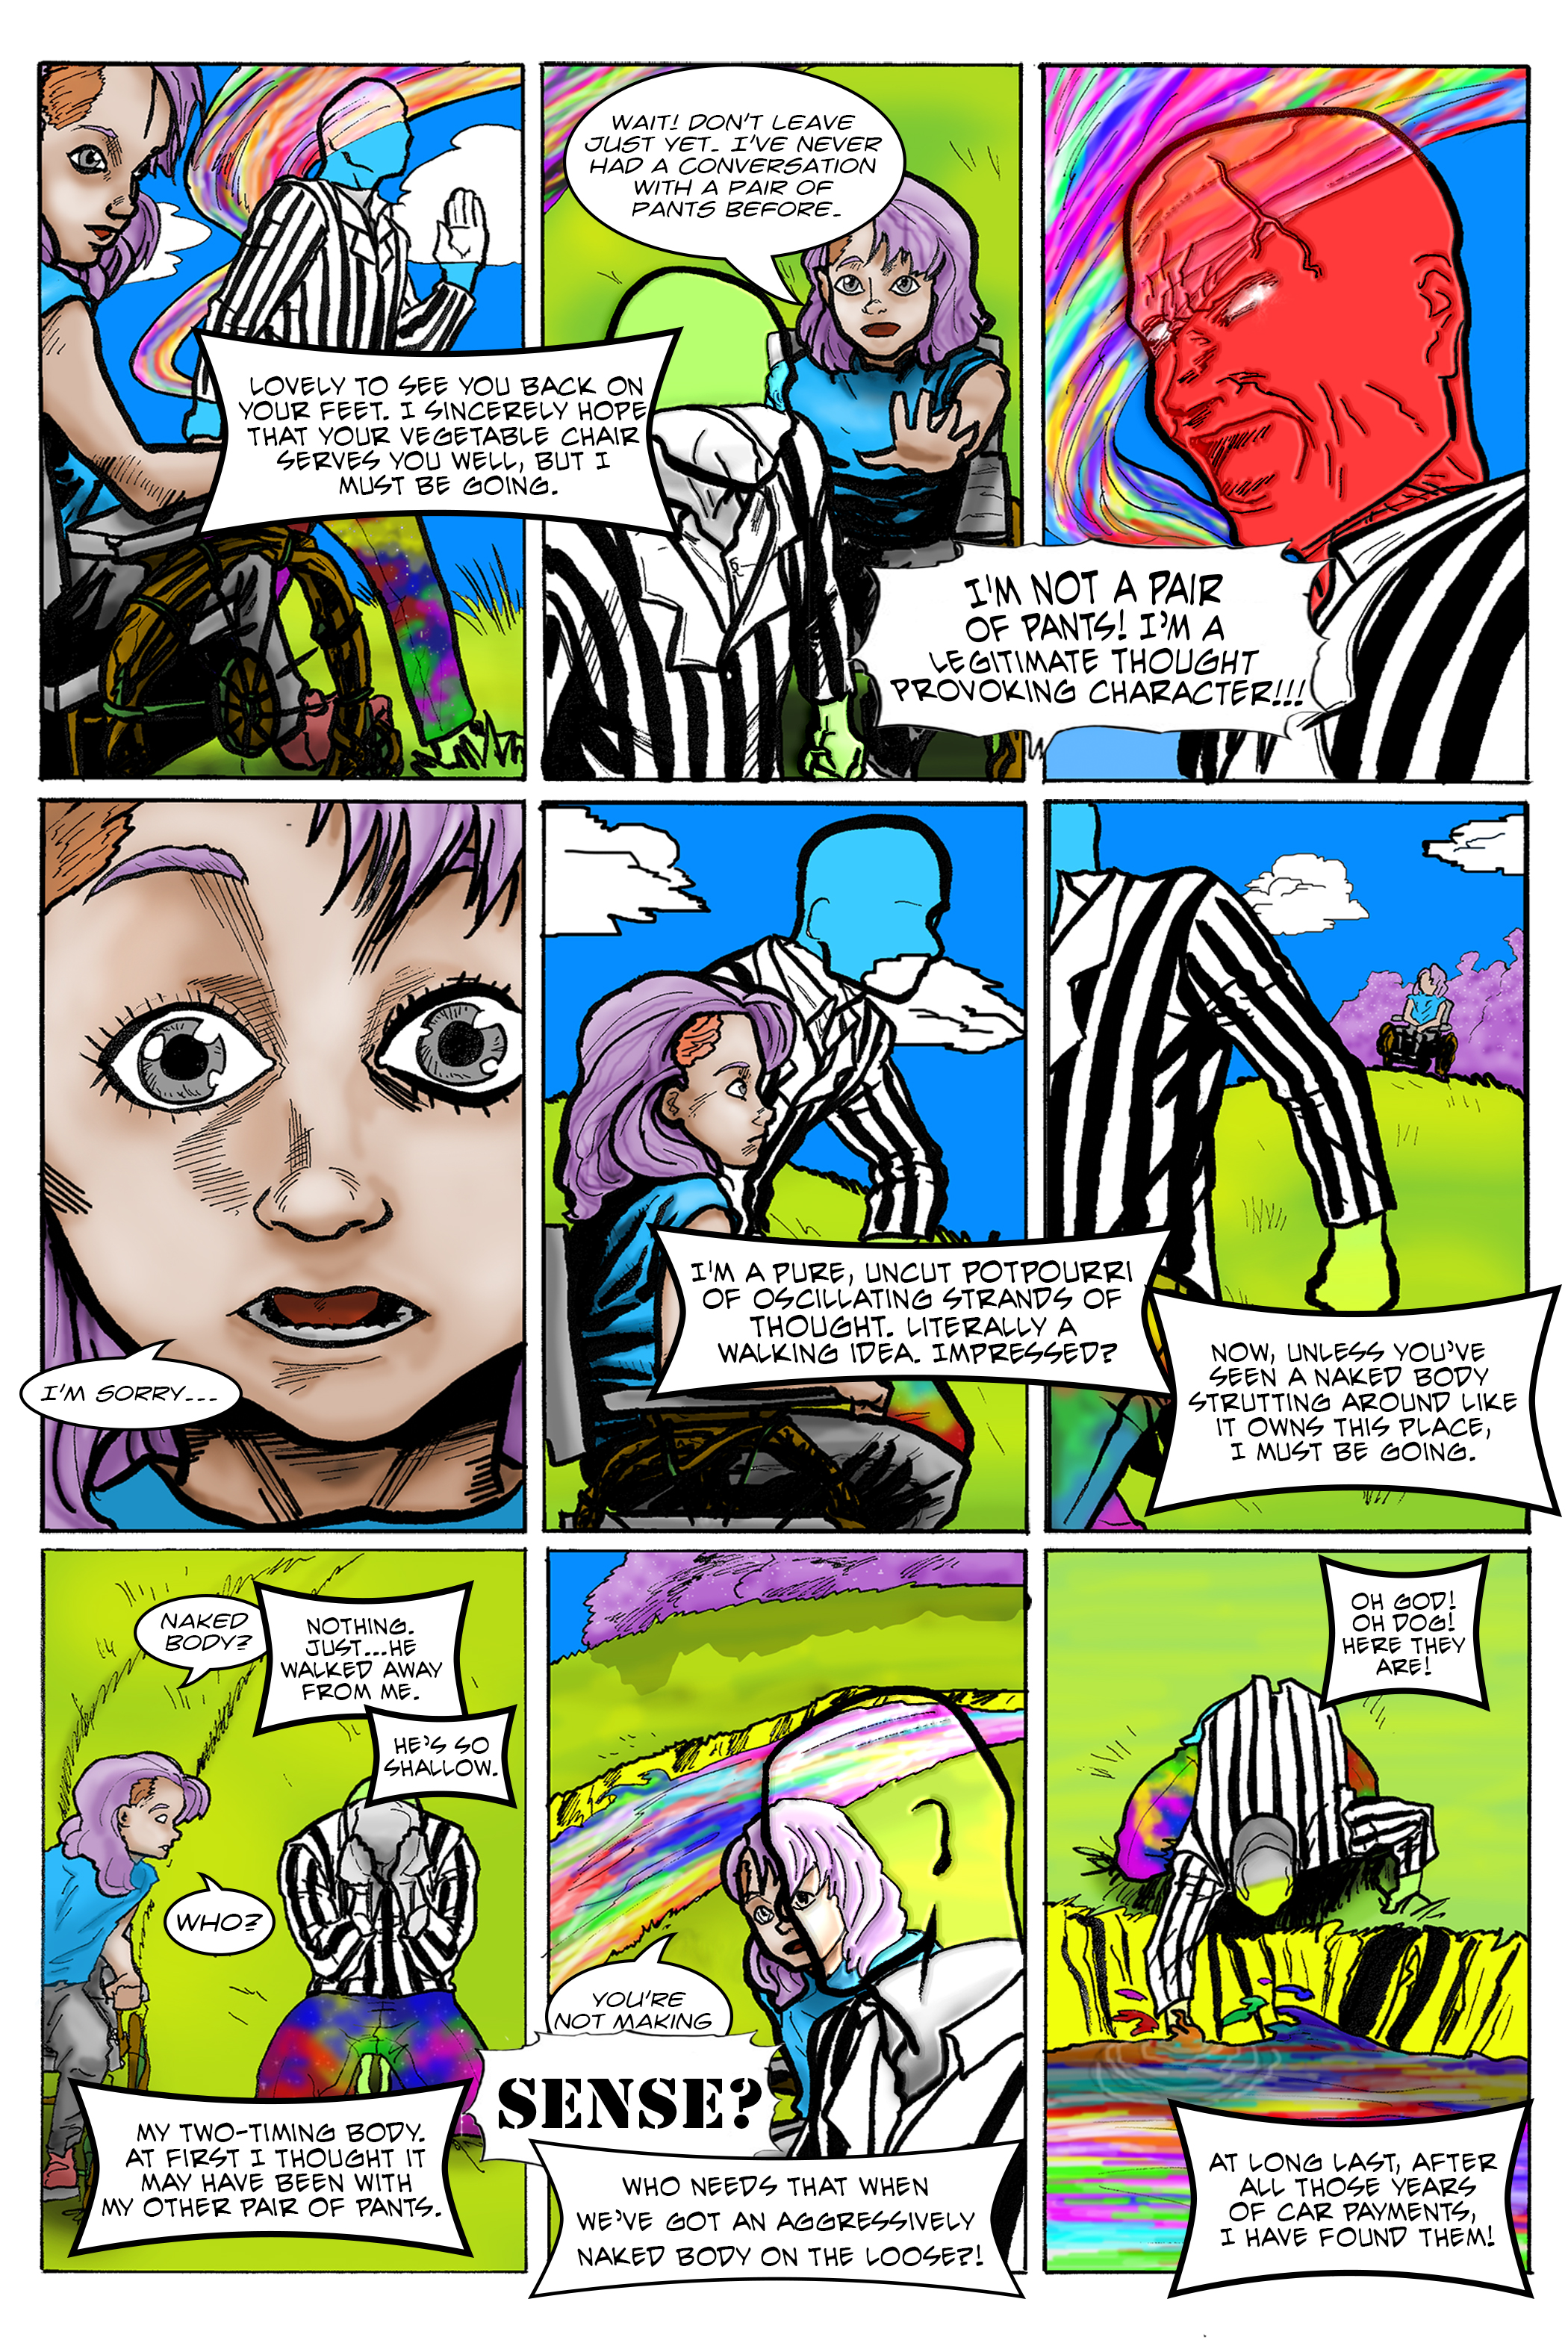 Chapter 1 Page 13.jpg